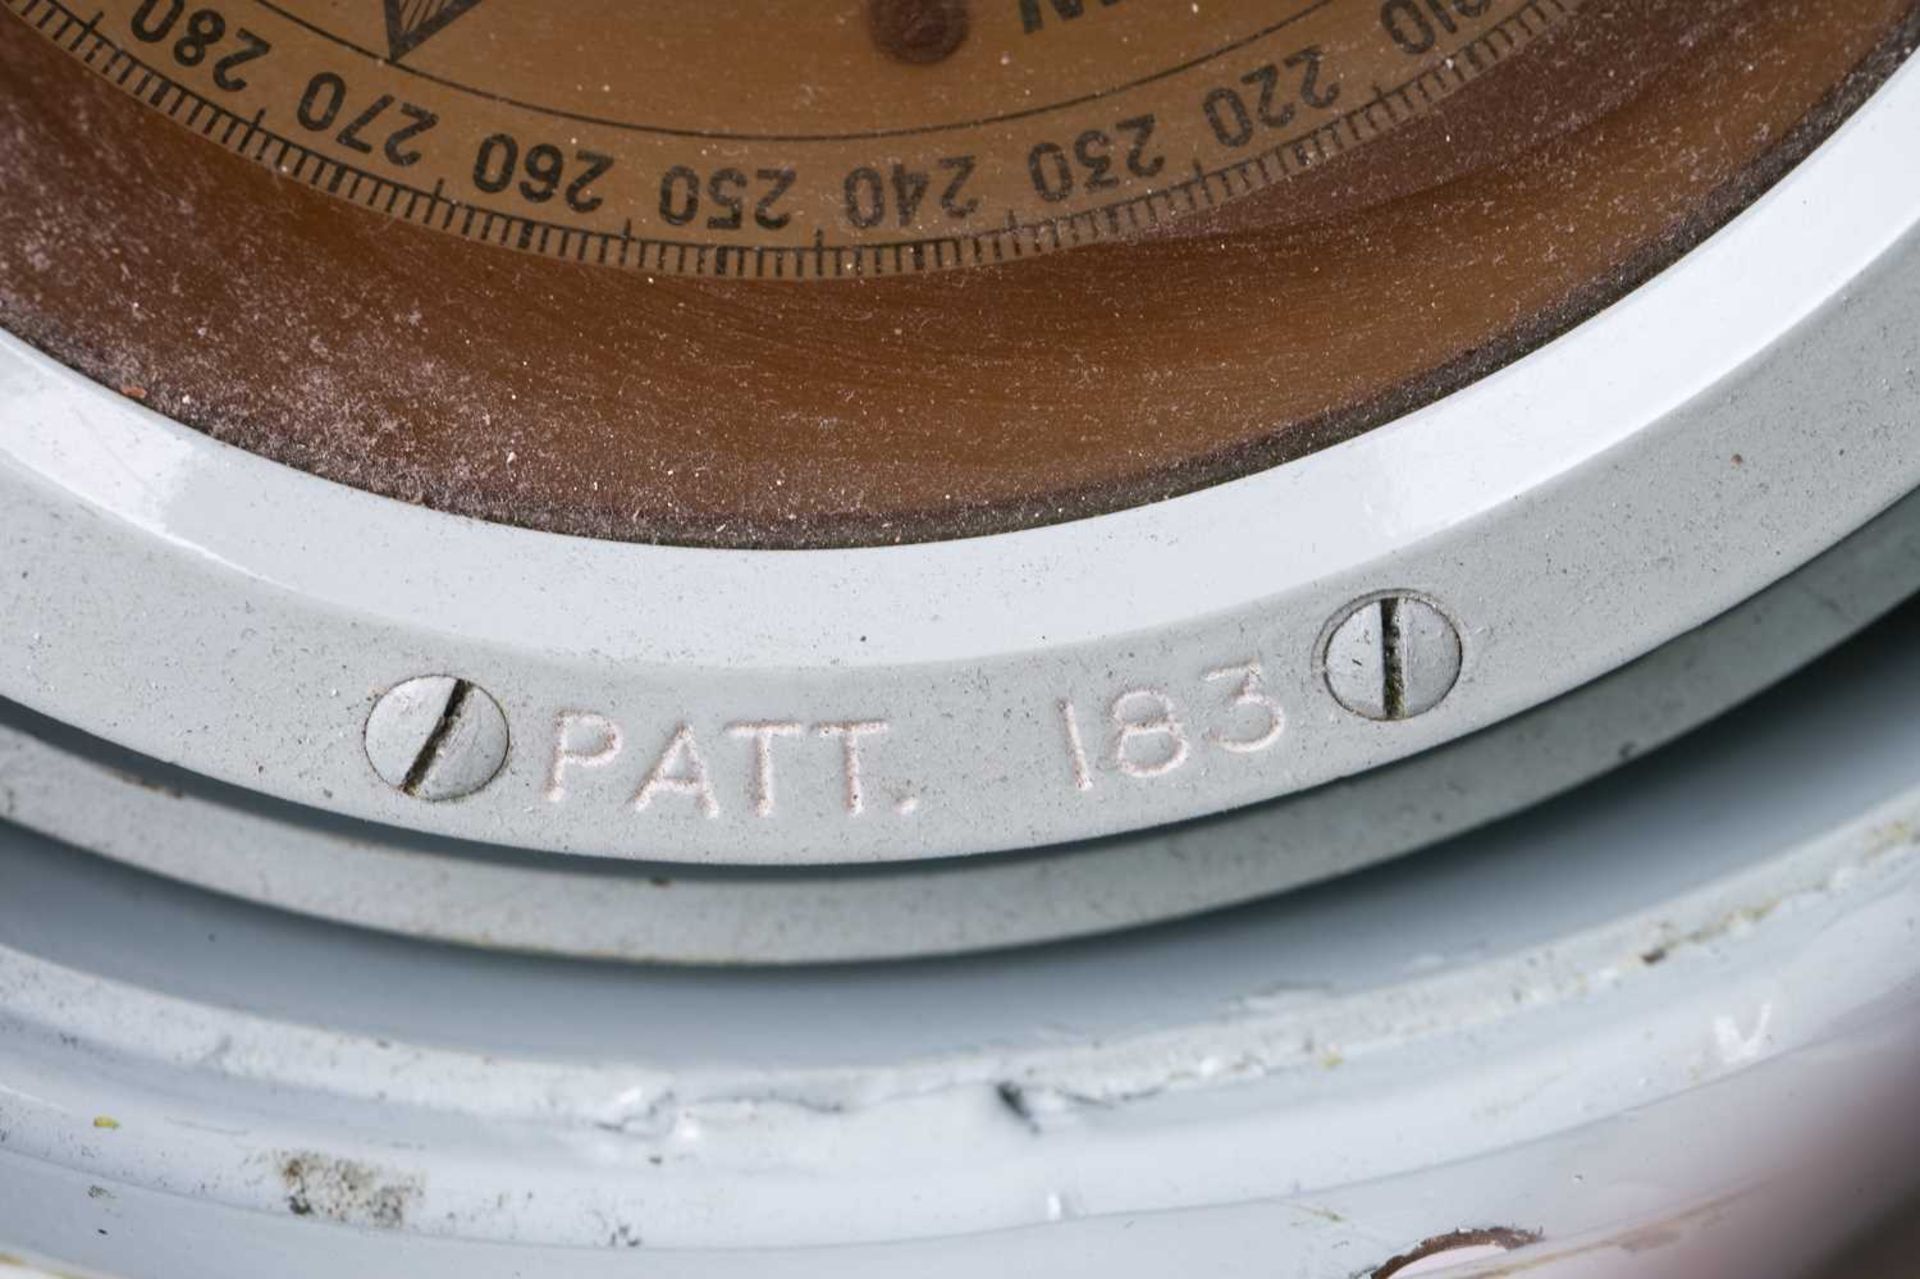 An early 20th-century Royal Navy (Lifeboat?) brass Patt.183 binnacle and liquid-damped compass - Image 9 of 13